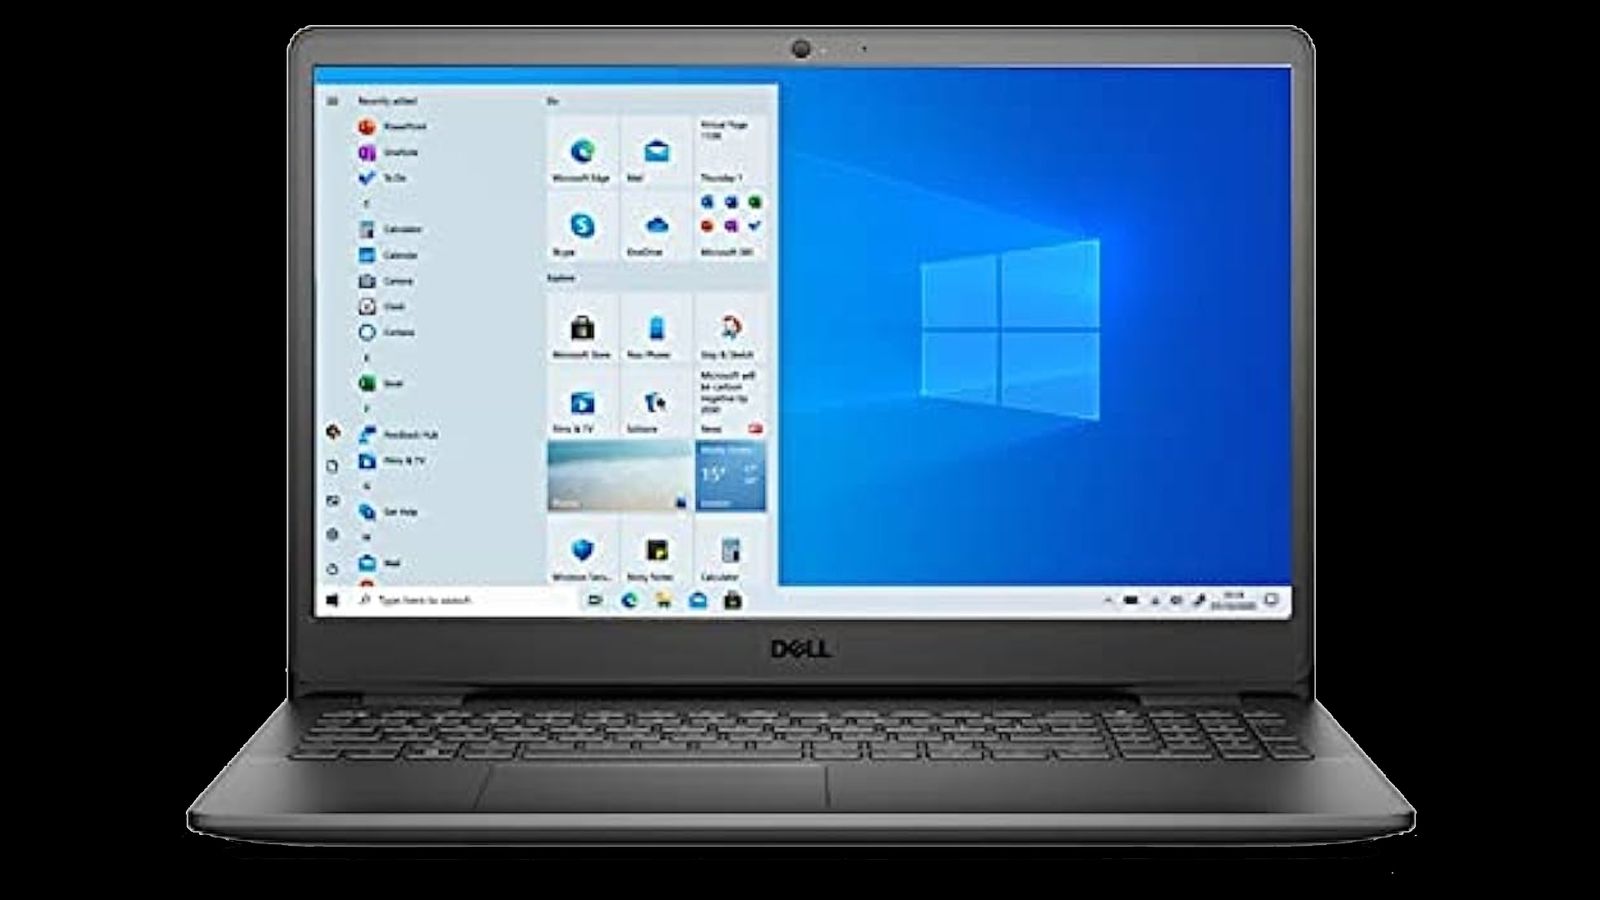 Dell Inspiron 15 3000 product image of a black laptop with Windows on the display.